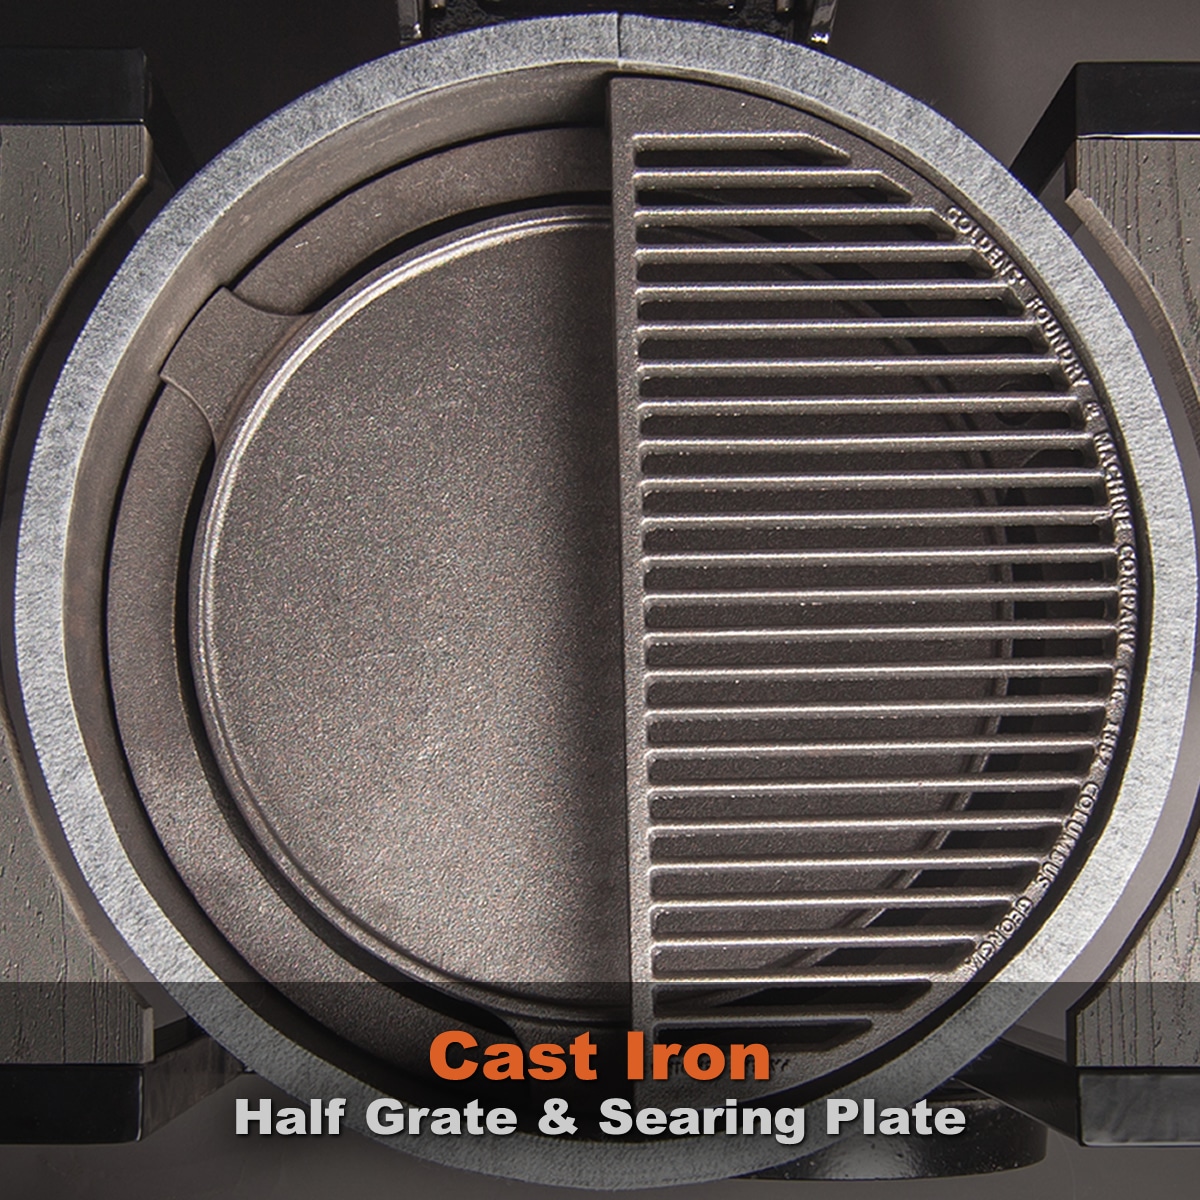 Cast Iron Half Grate for 20.5" Cooker